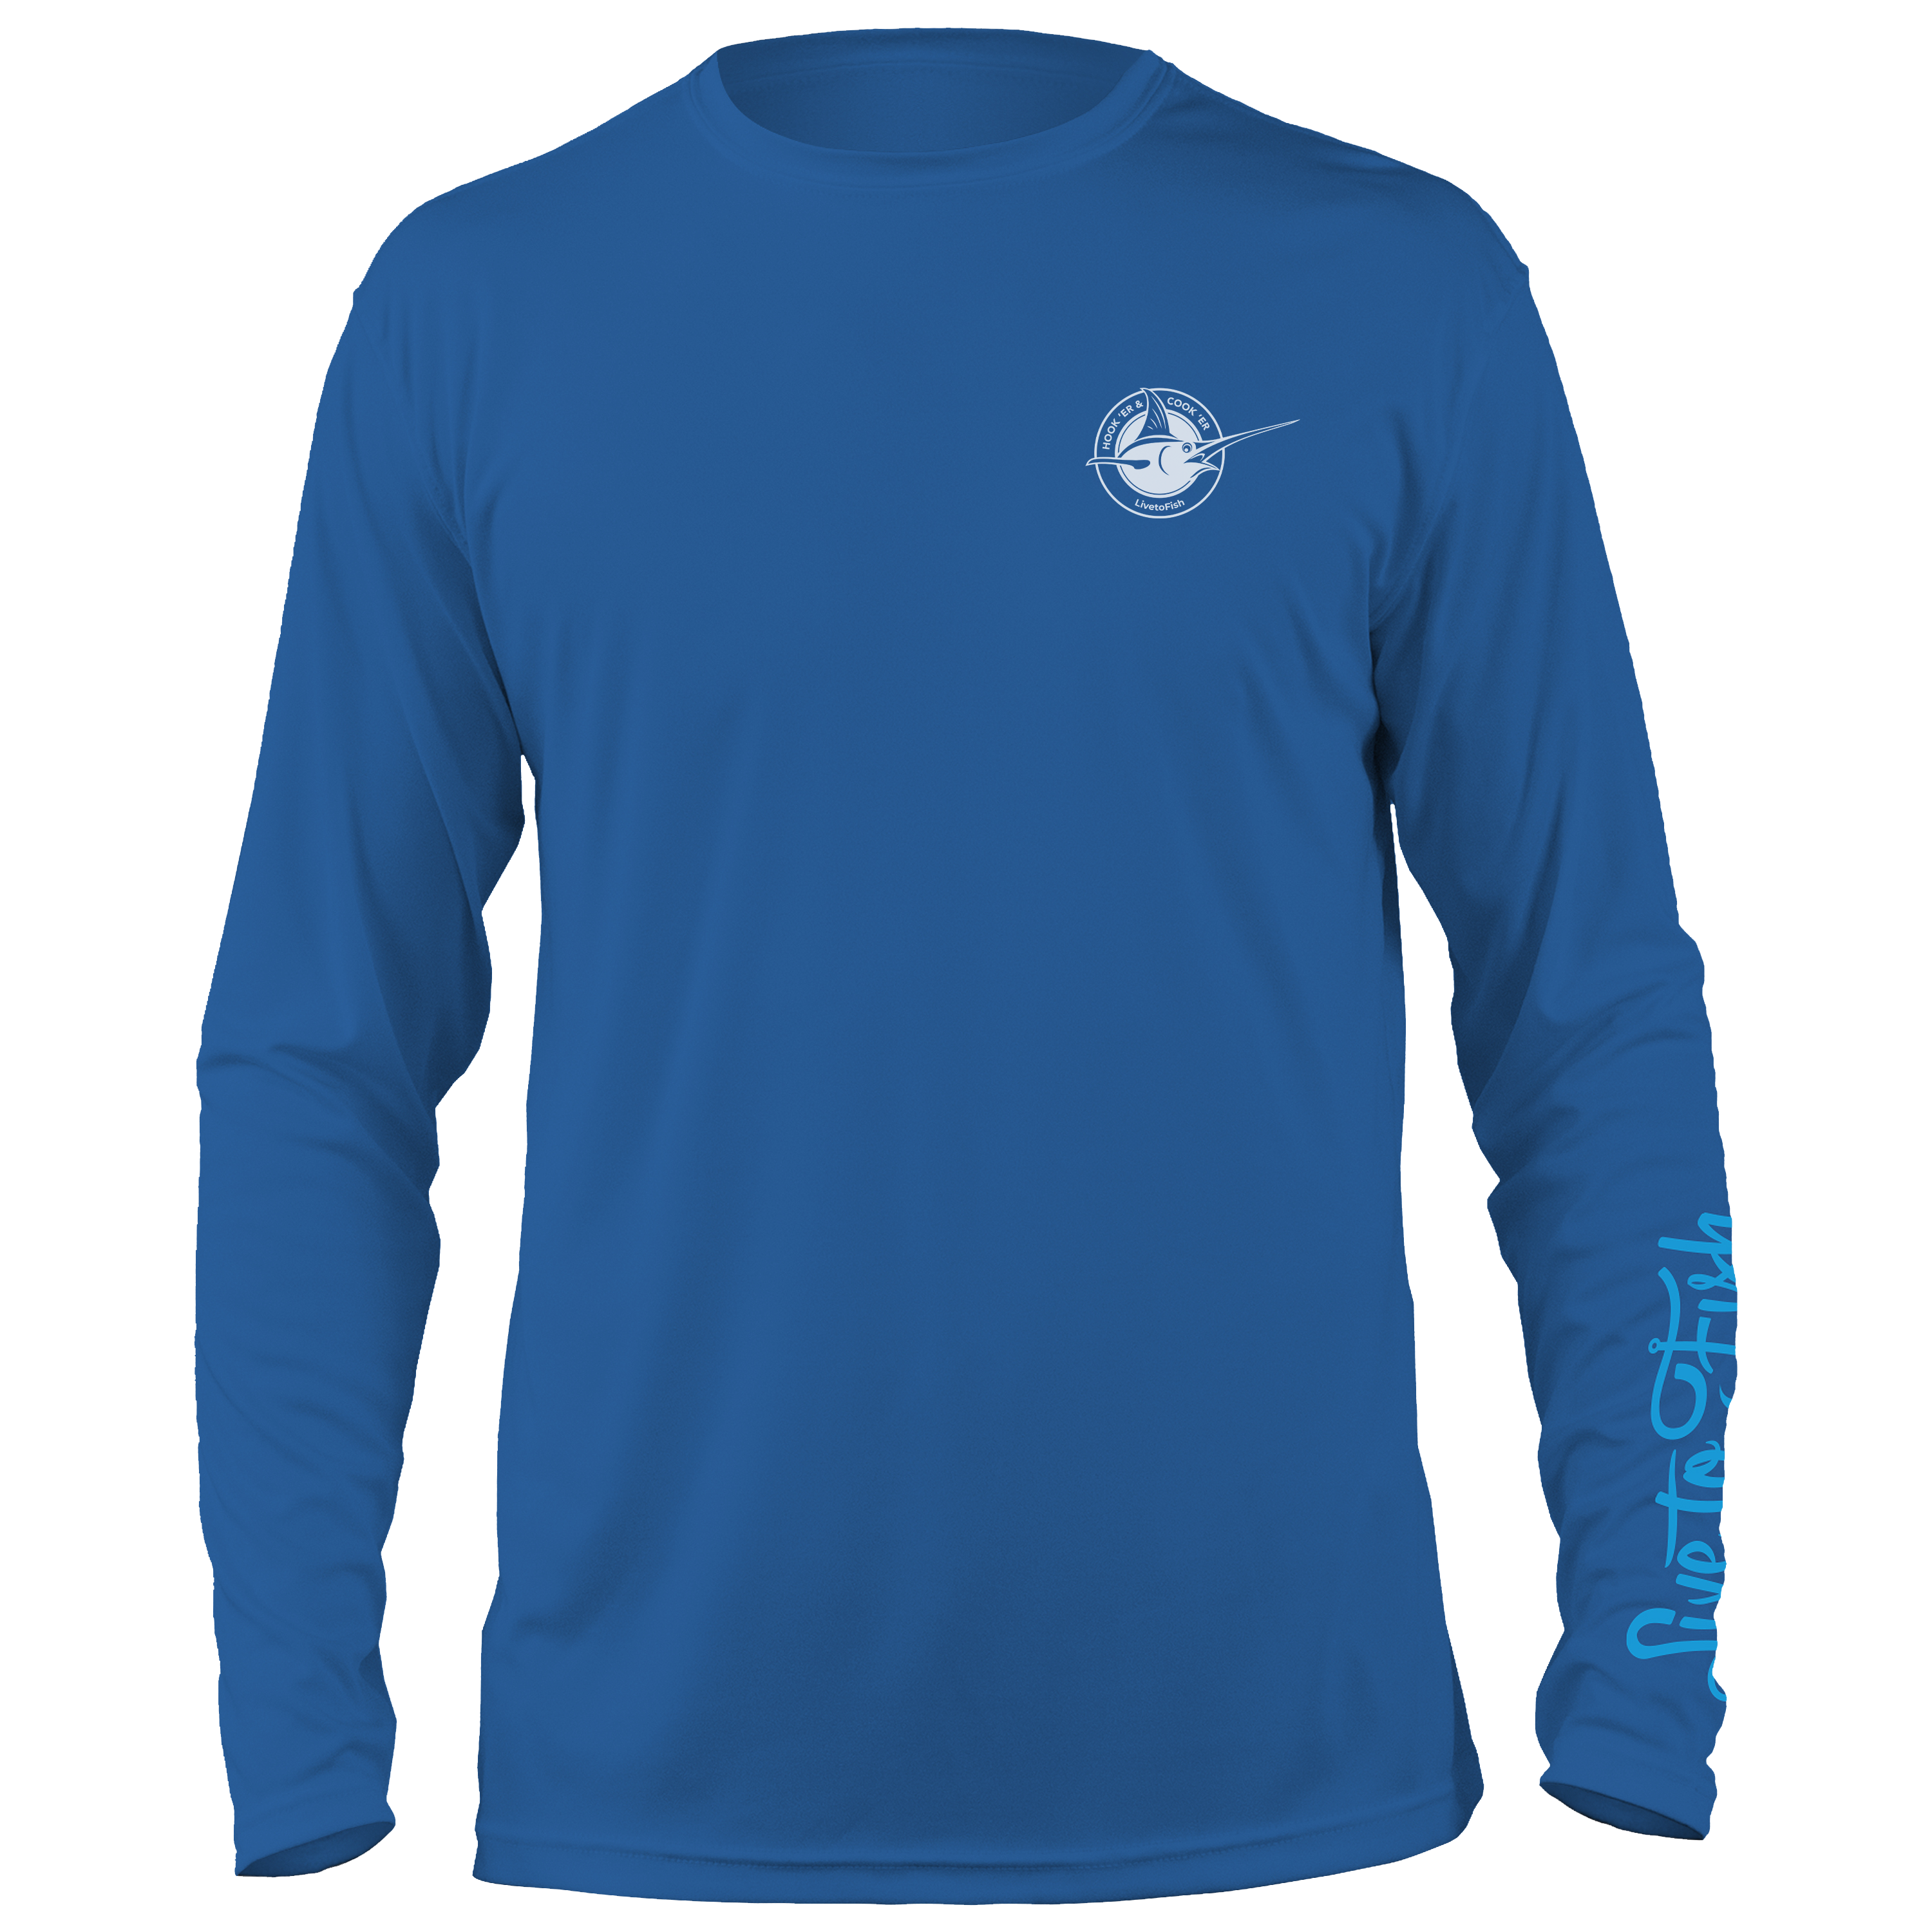 Classic Marlin Long Sleeve UV Shirt, Offshore Blue | Live to Fish